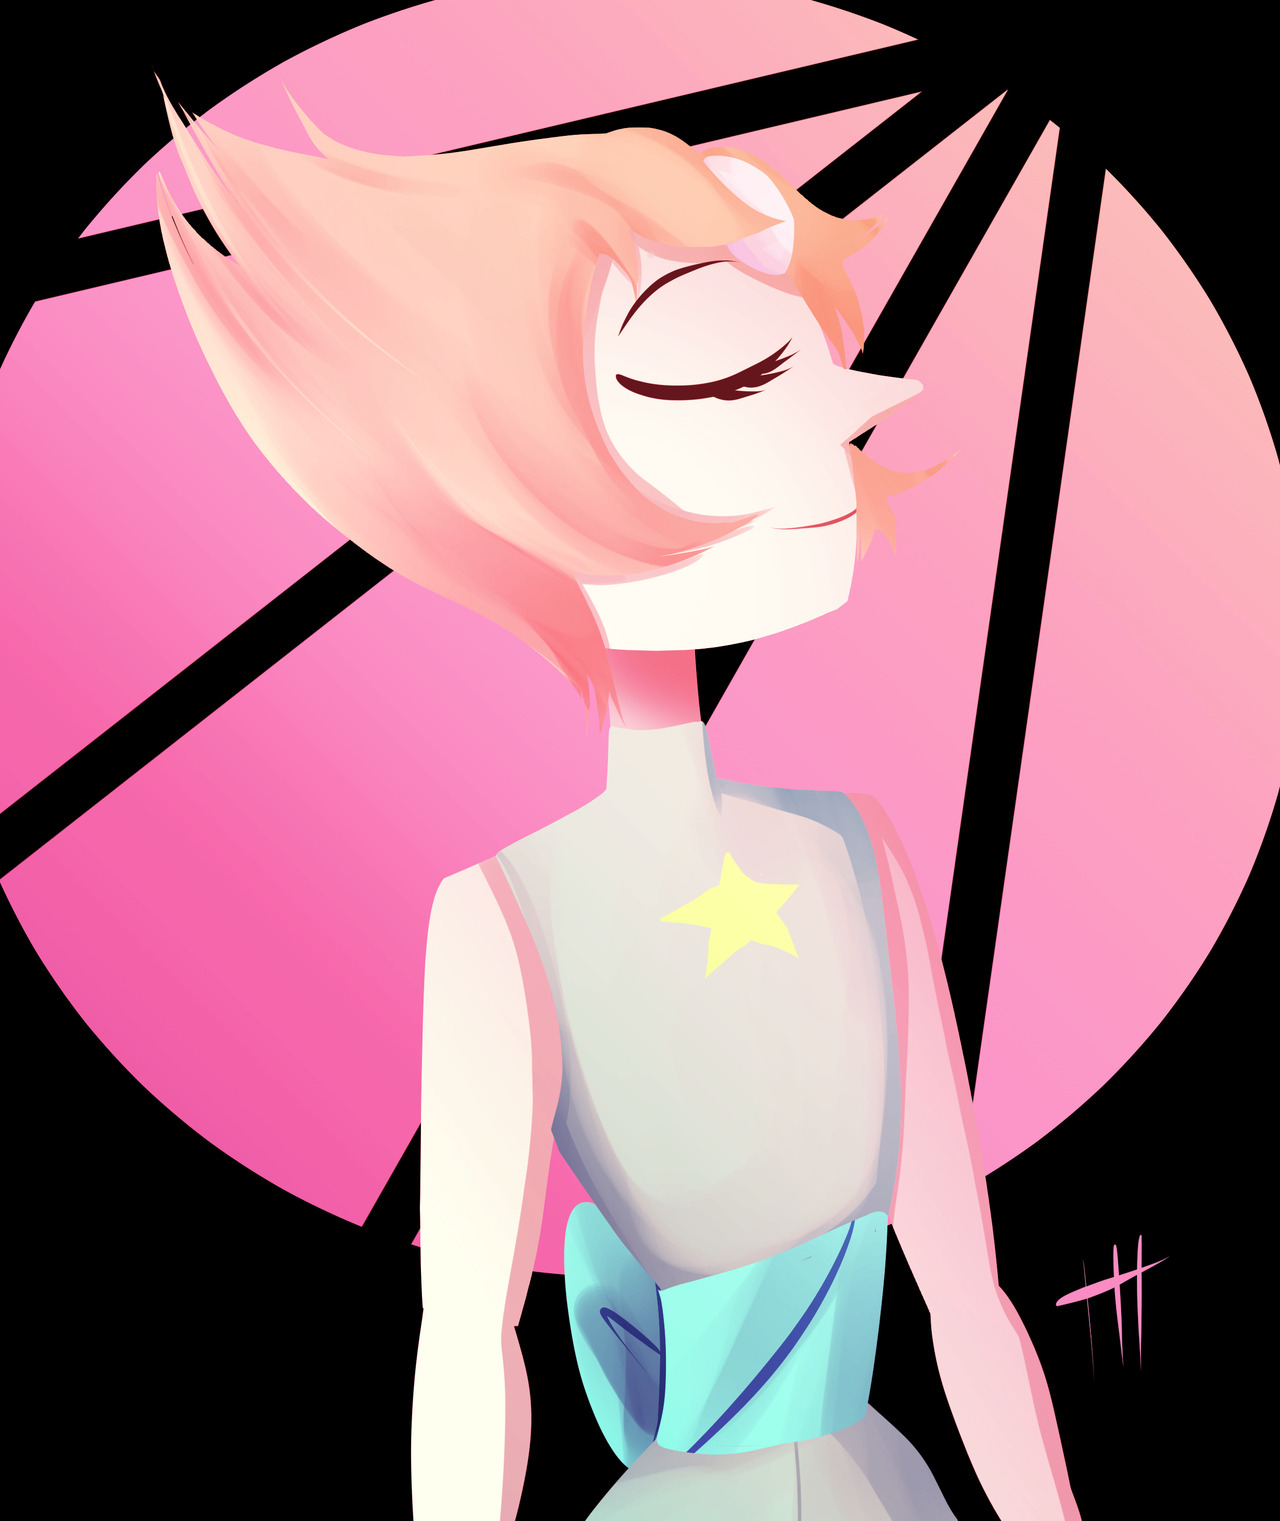 I had an old drawing of pearl I just had laying around, so I decided I’d redraw it. If you like what I do, and want me to do more of it, consider buying me a coffee!